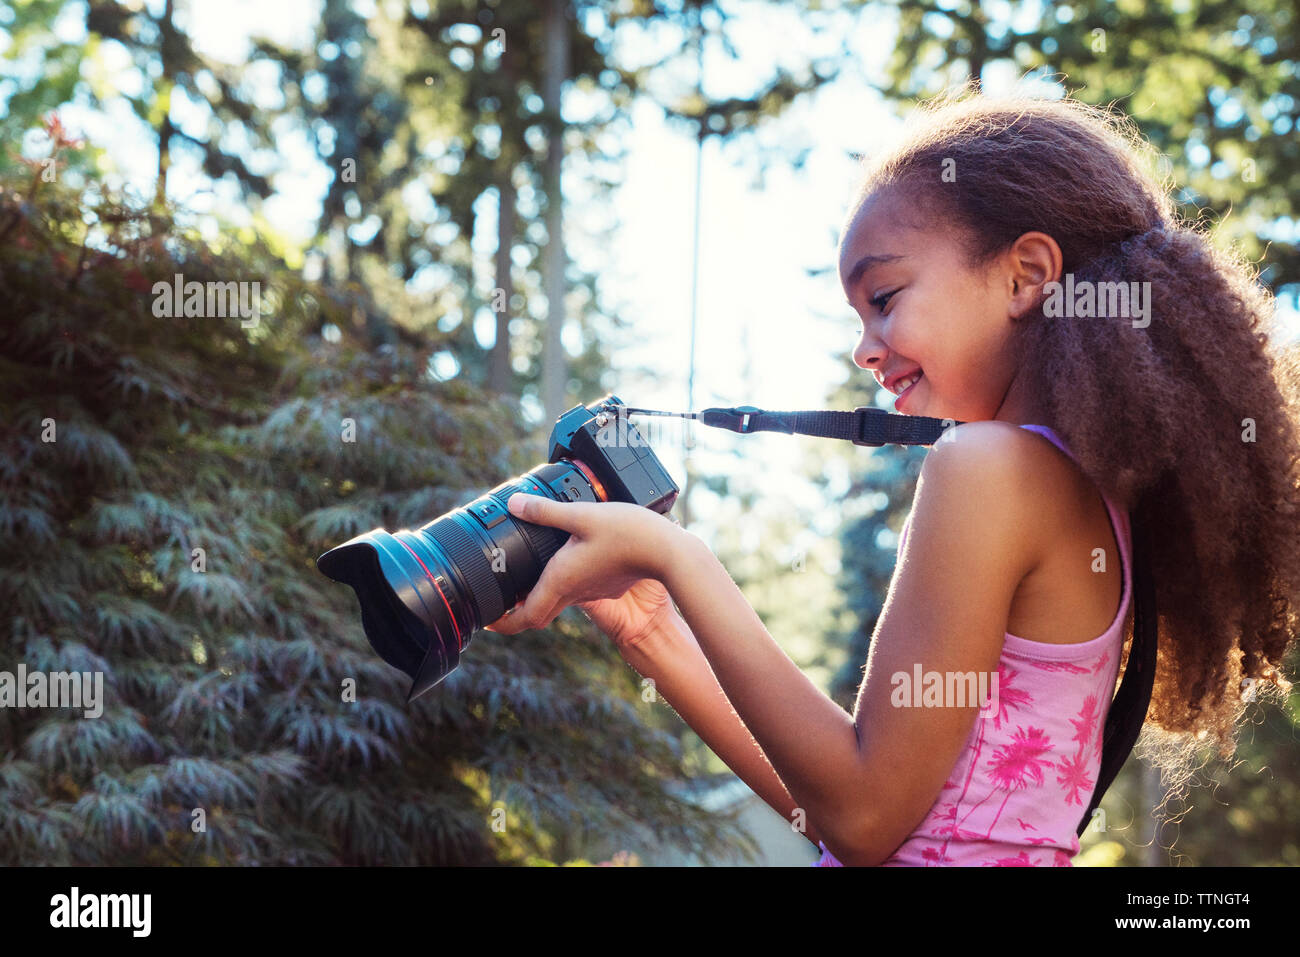 Side view of girl using digital camera Stock Photo